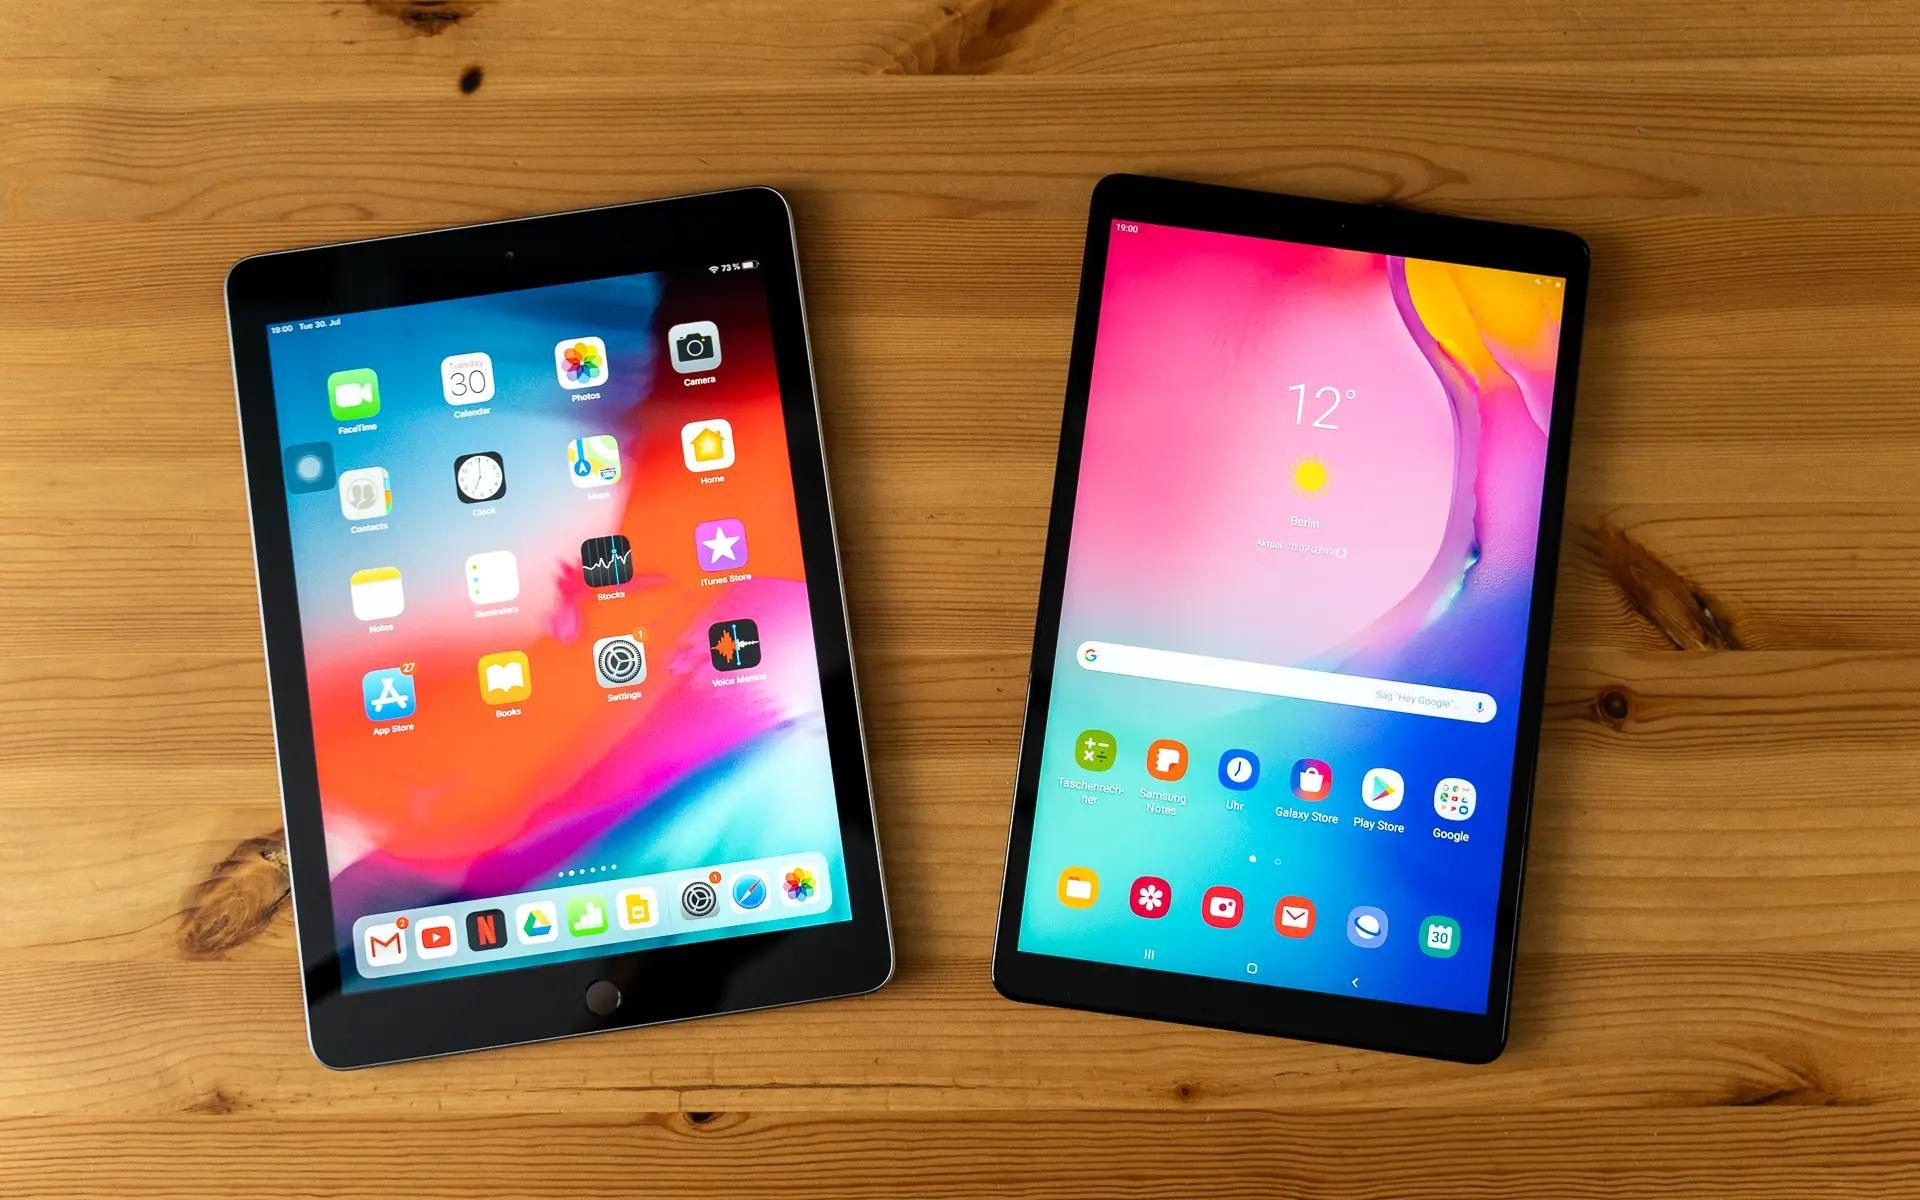 How To Transfer Data From IPad To Samsung Tablet